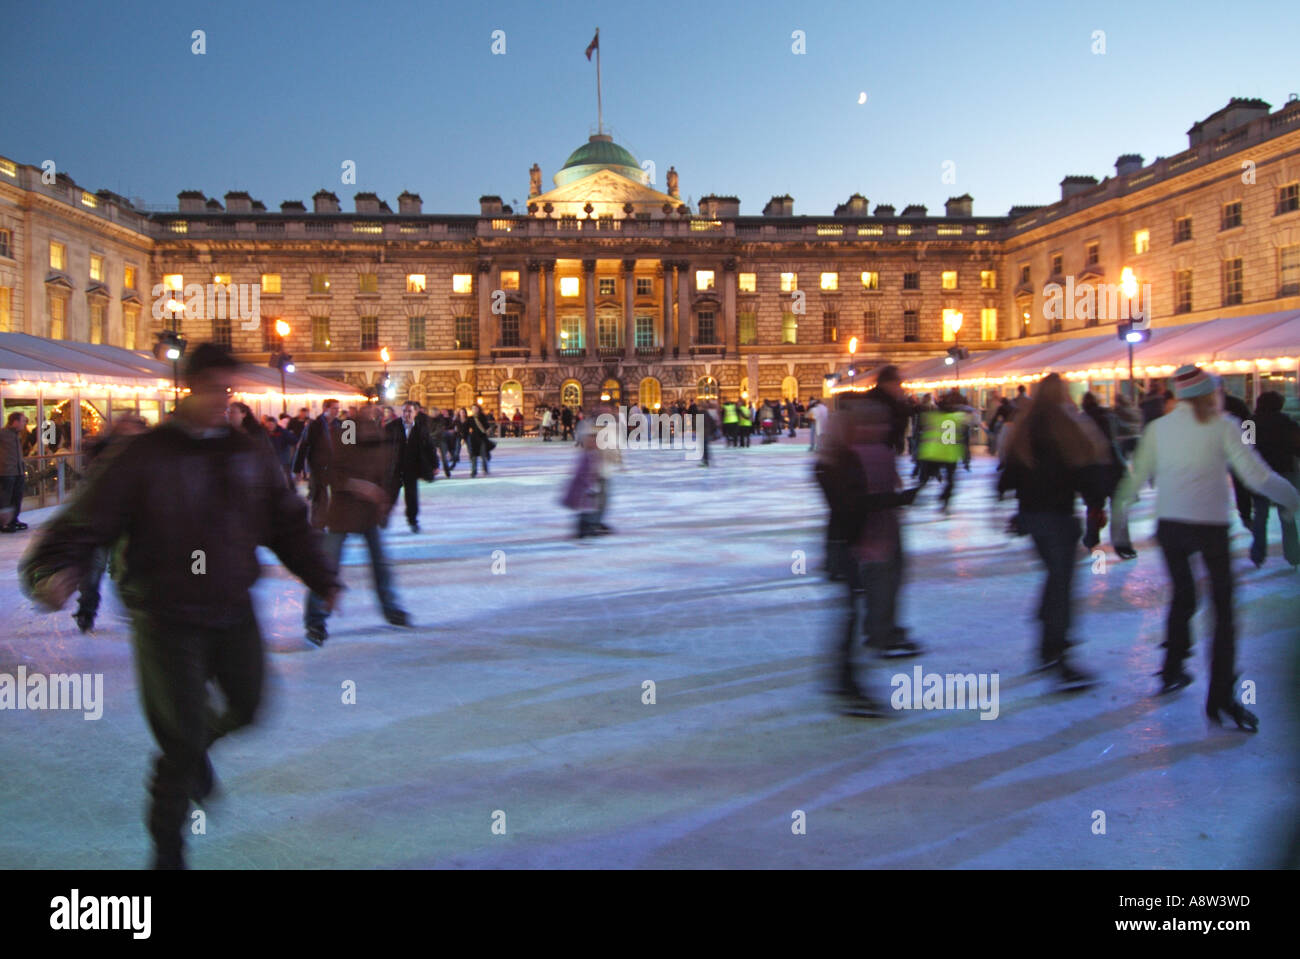 Adults & kids ice skaters with backdrop historical Somerset House building & courtyard on temporary winter ice skating rink Strand London England UK Stock Photo